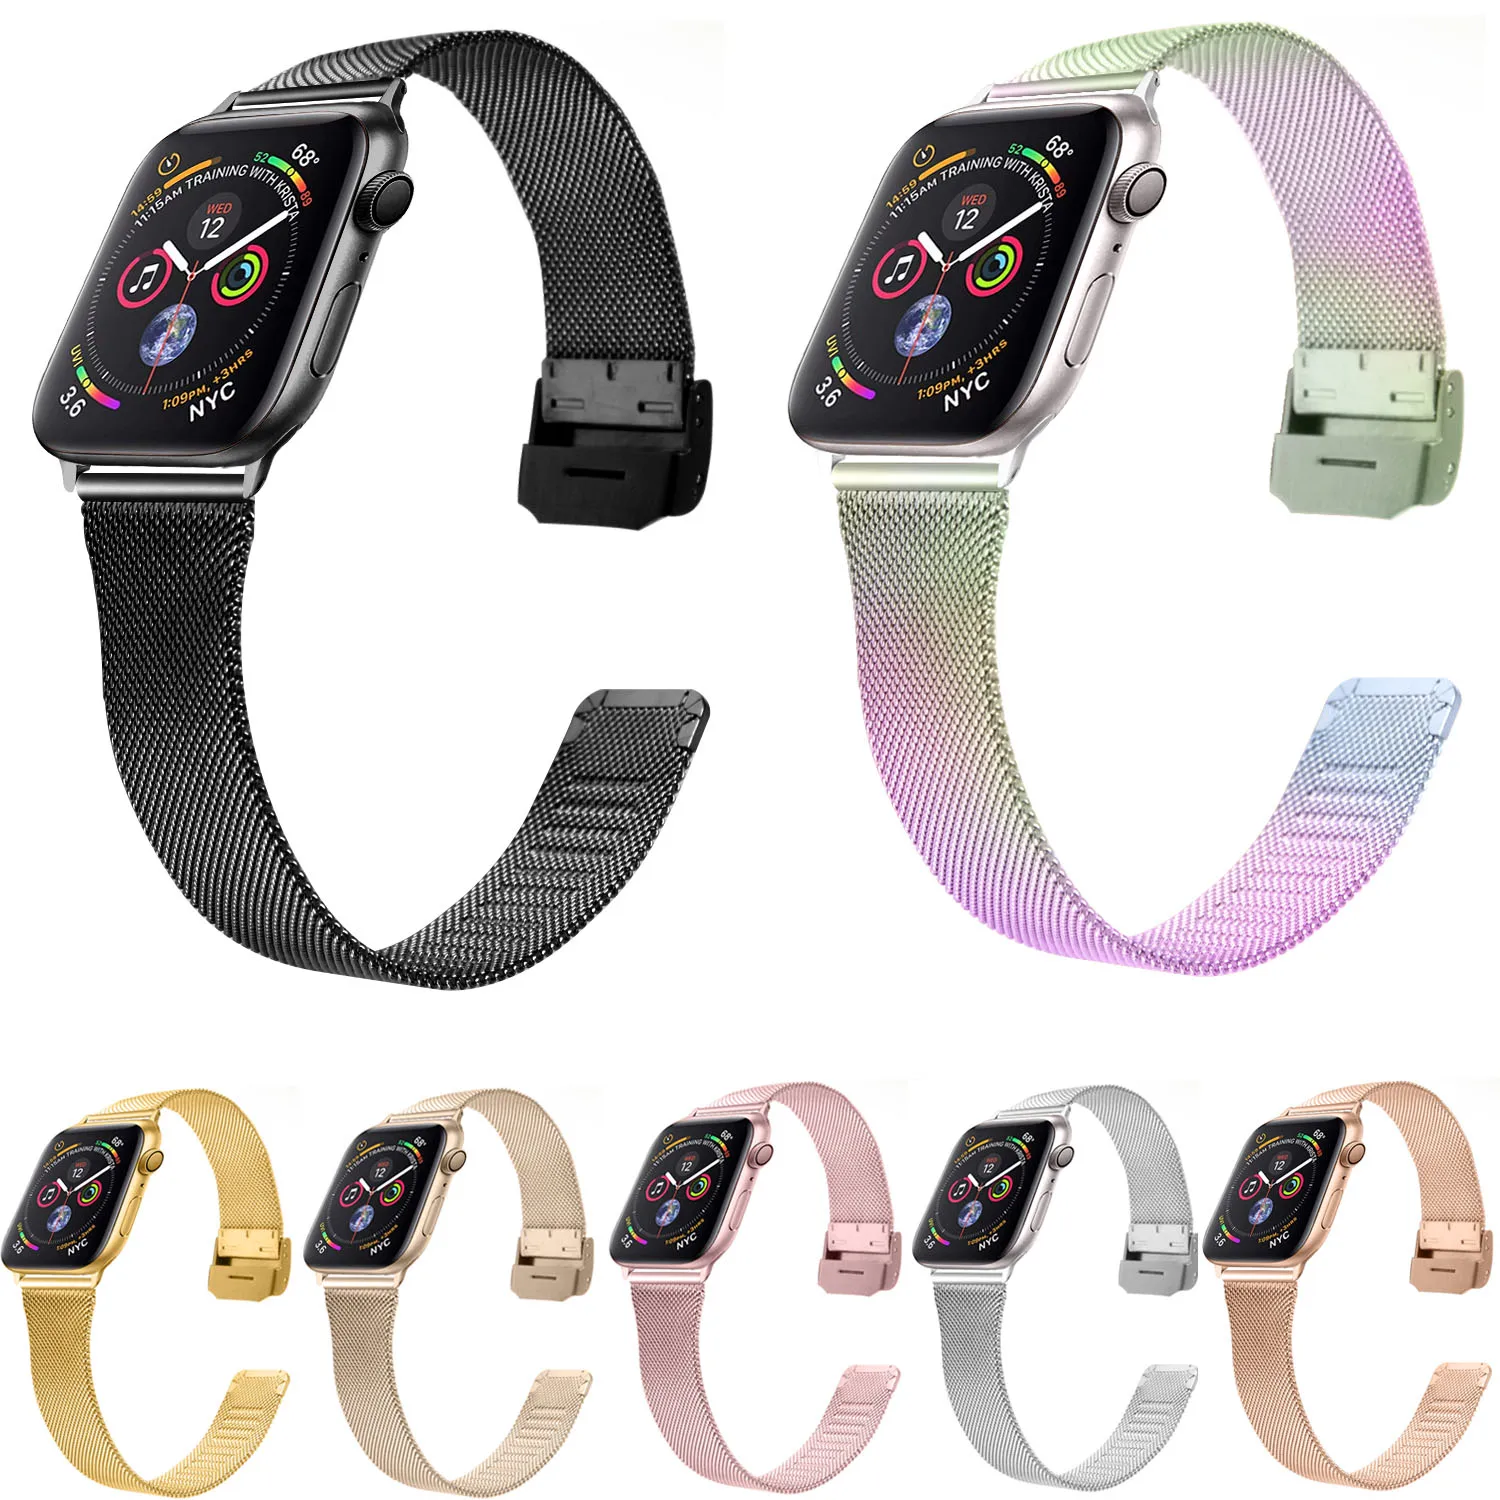 

Meshed Loop Band For Apple Watch Series 5 4 3 2 1 Strap Stainless Steel Metal Watchband For iWatch 44mm 42mm 40mm 38mm Bands